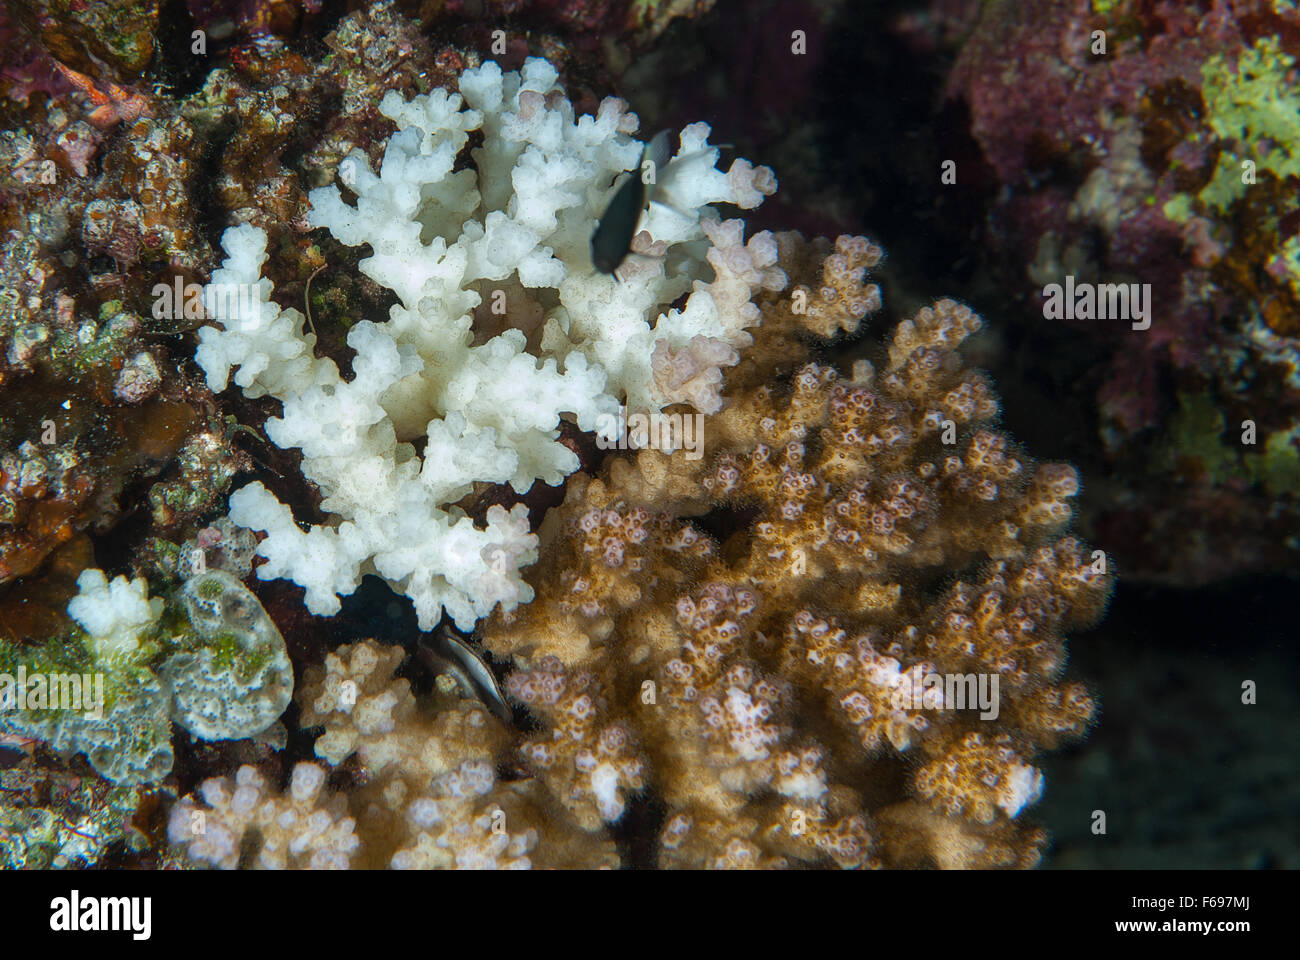 Coral bleaching of branching coral, Pocillopora verrucosa, Pocilloporidae, Sharm el Sheikh, Red Sea, Egypt Stock Photo